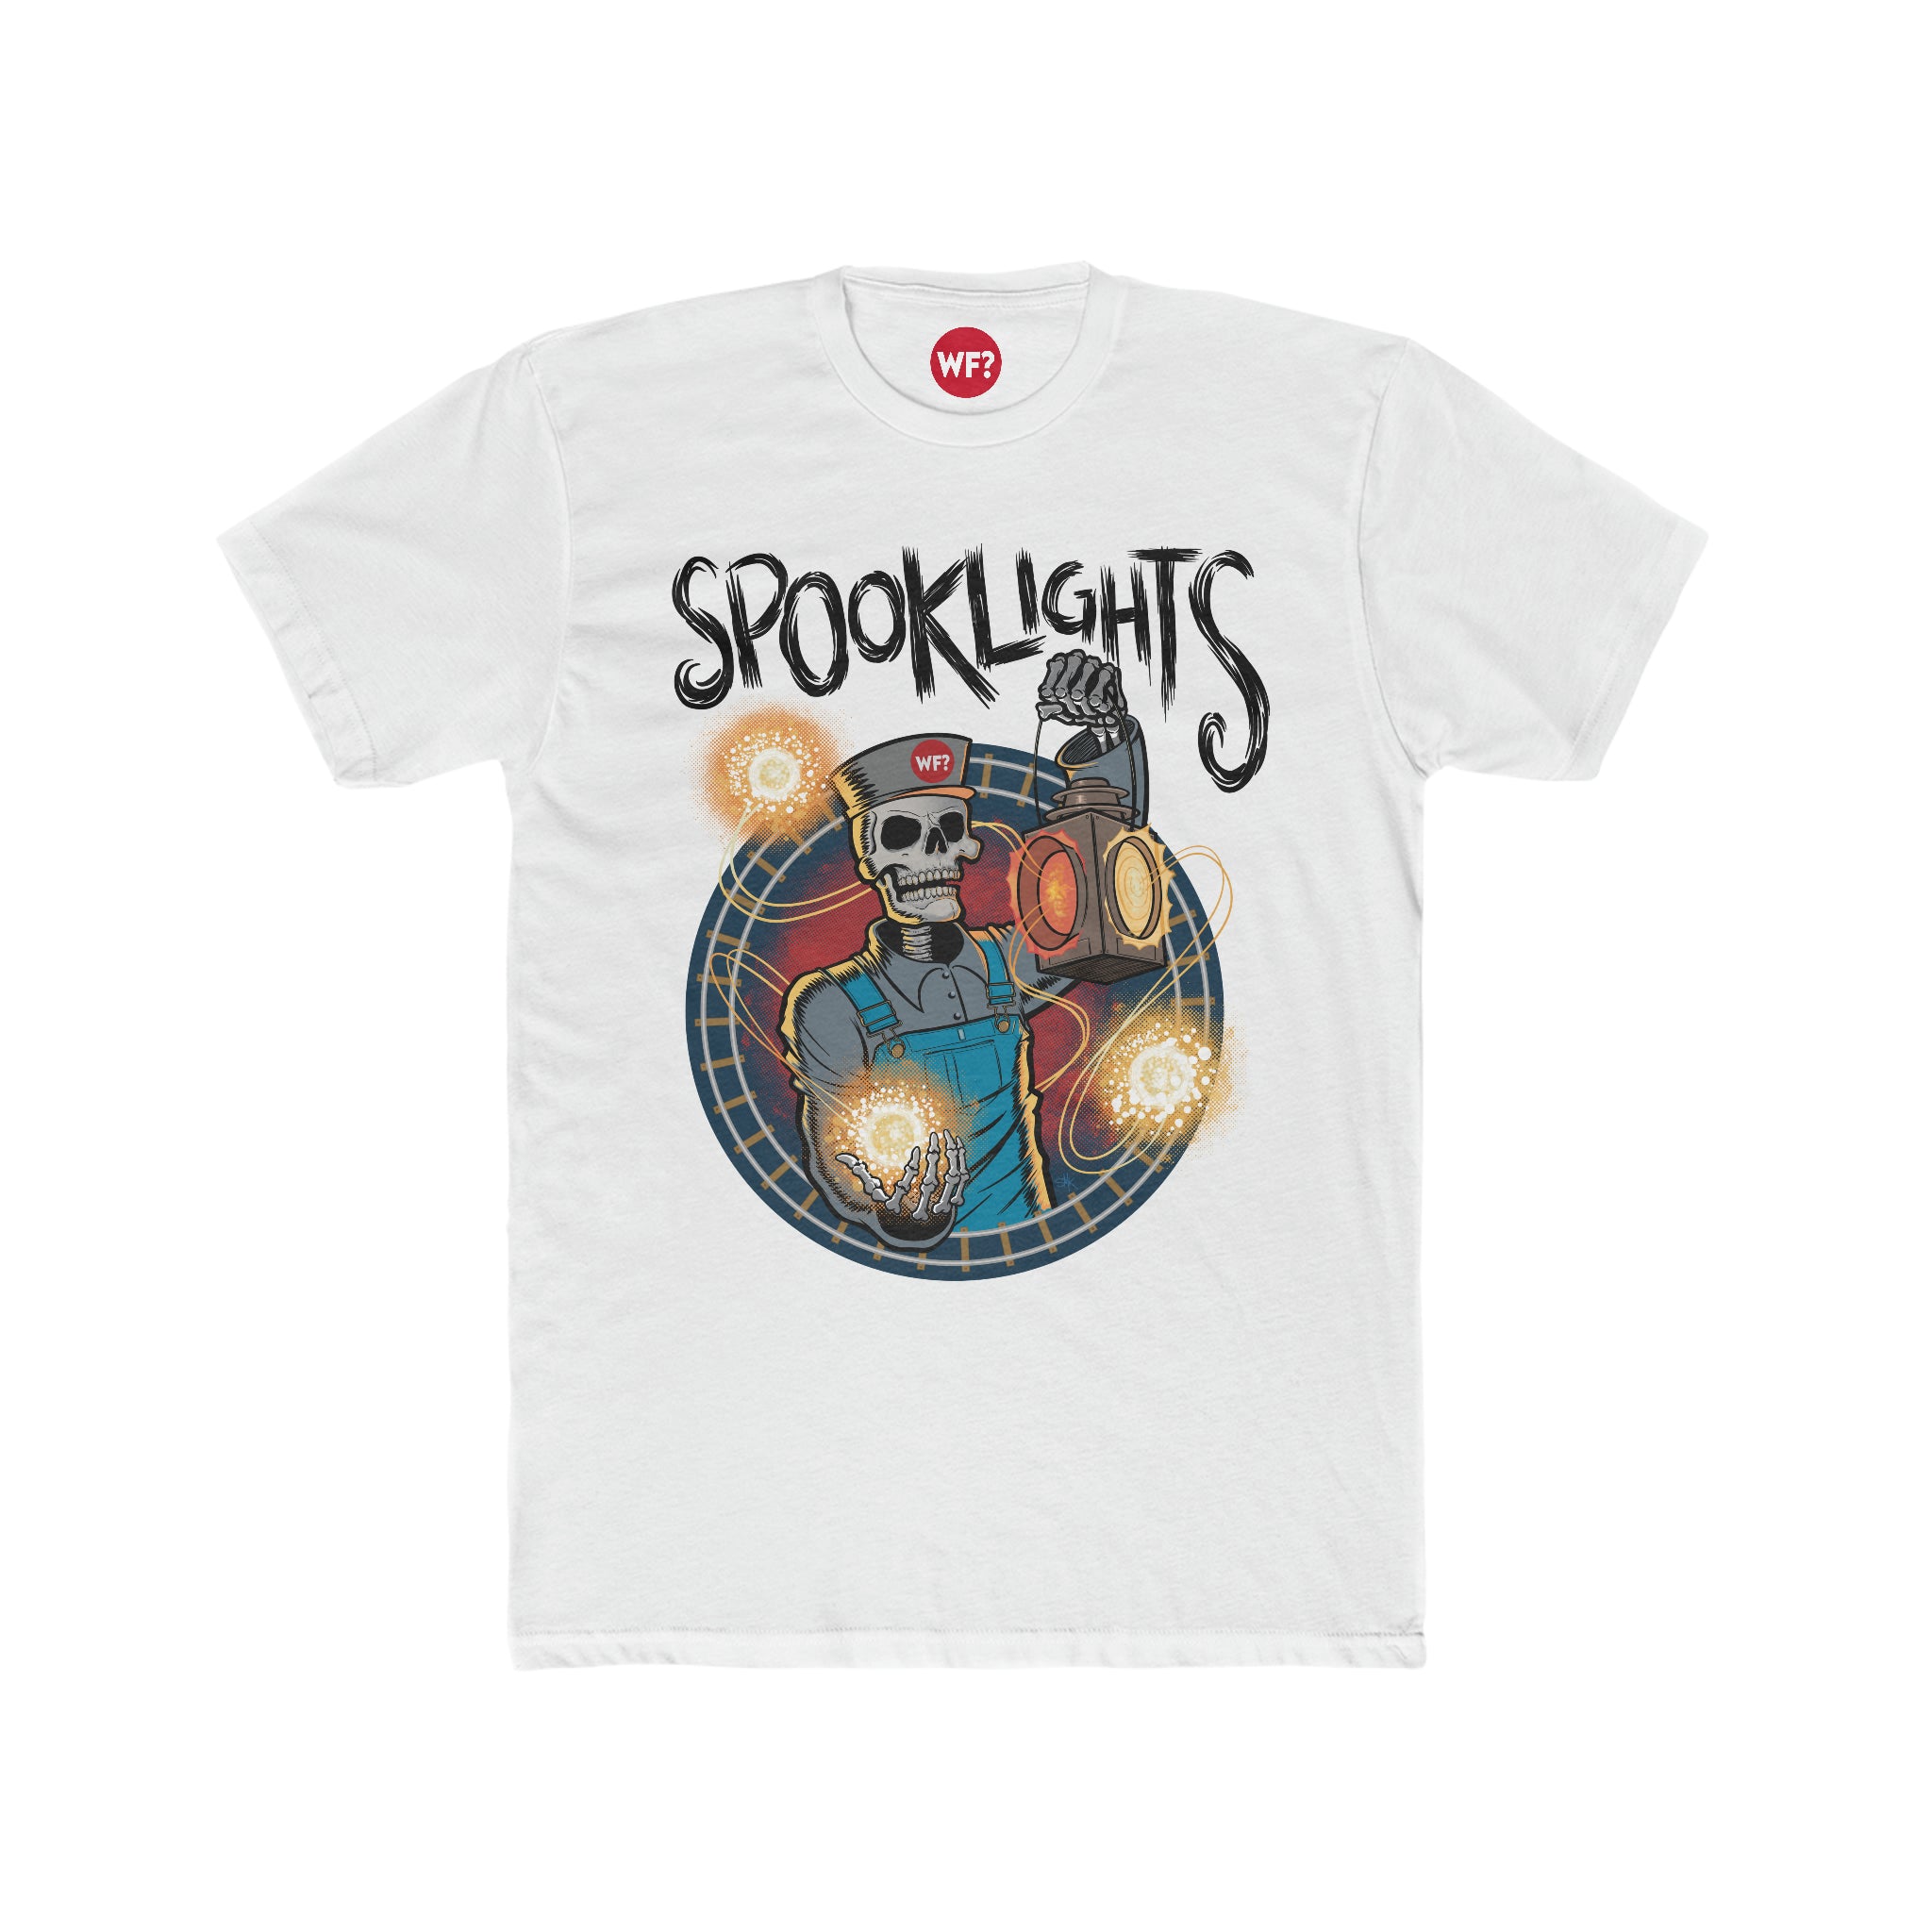 Buy solid-white Spooklights Limited T-Shirt